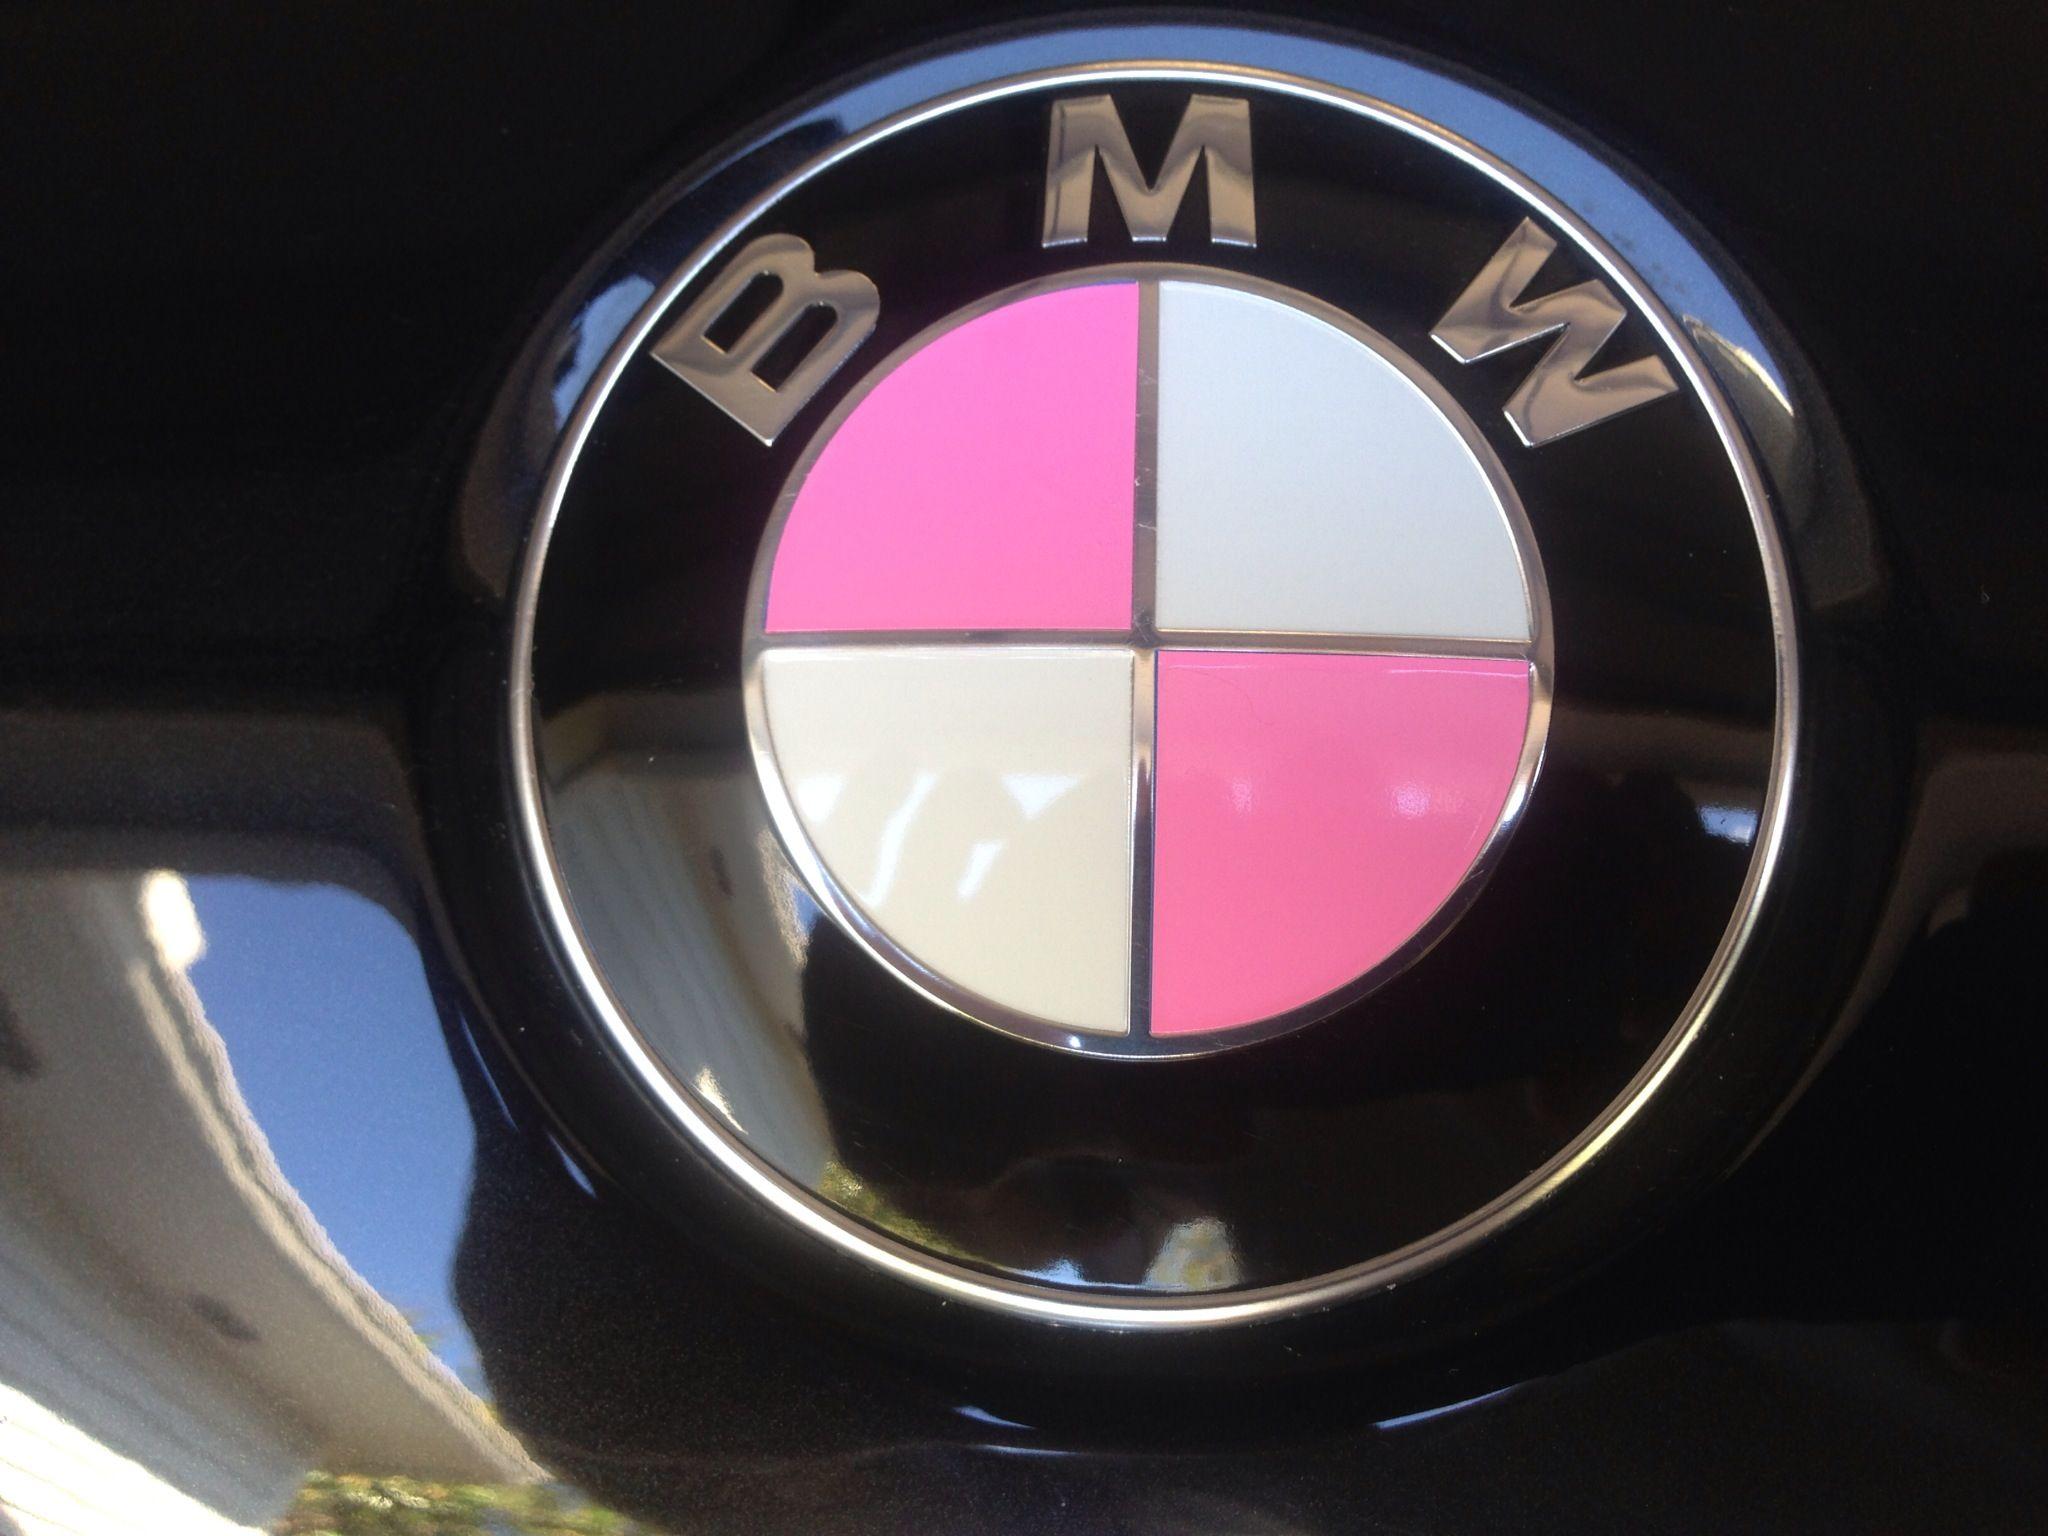 Pink BMW Logo - I have these pink roundels on my own 3 series BMW. People call me